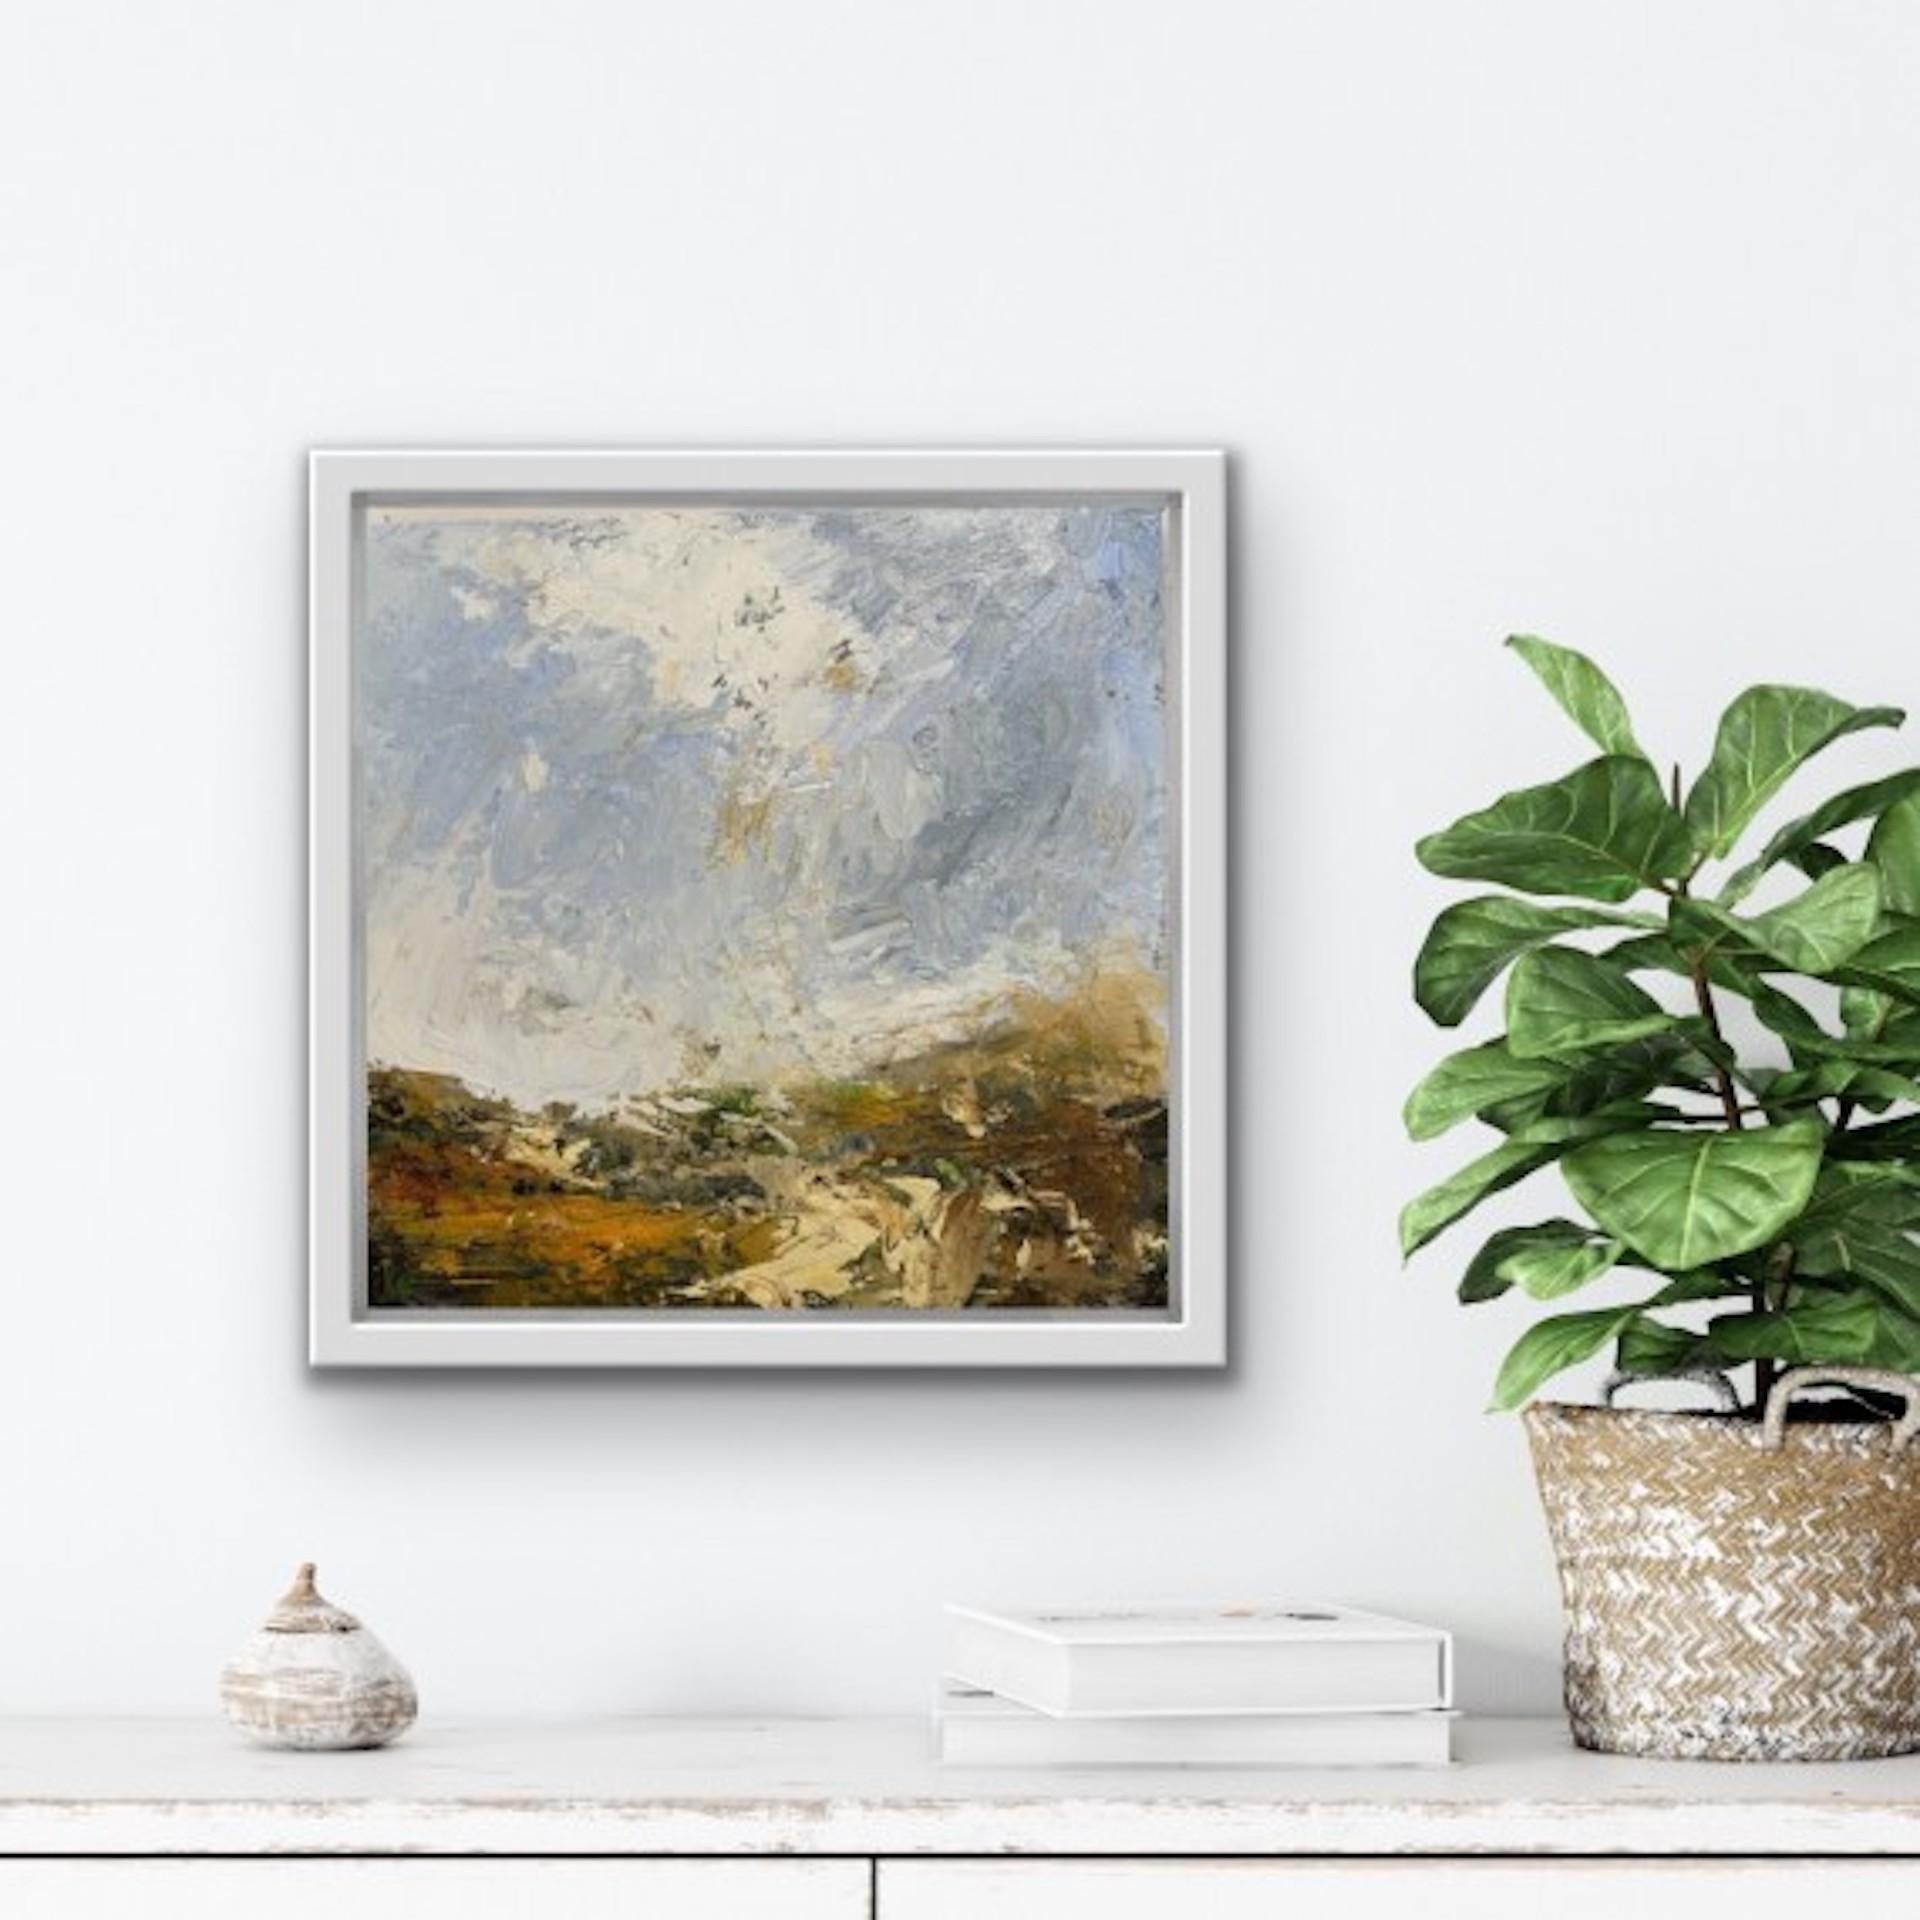 Polly Dutton, Sunbleached, Original Abstract Landscape Painting, Affordable Art - Gray Abstract Painting by Polly Dutton 